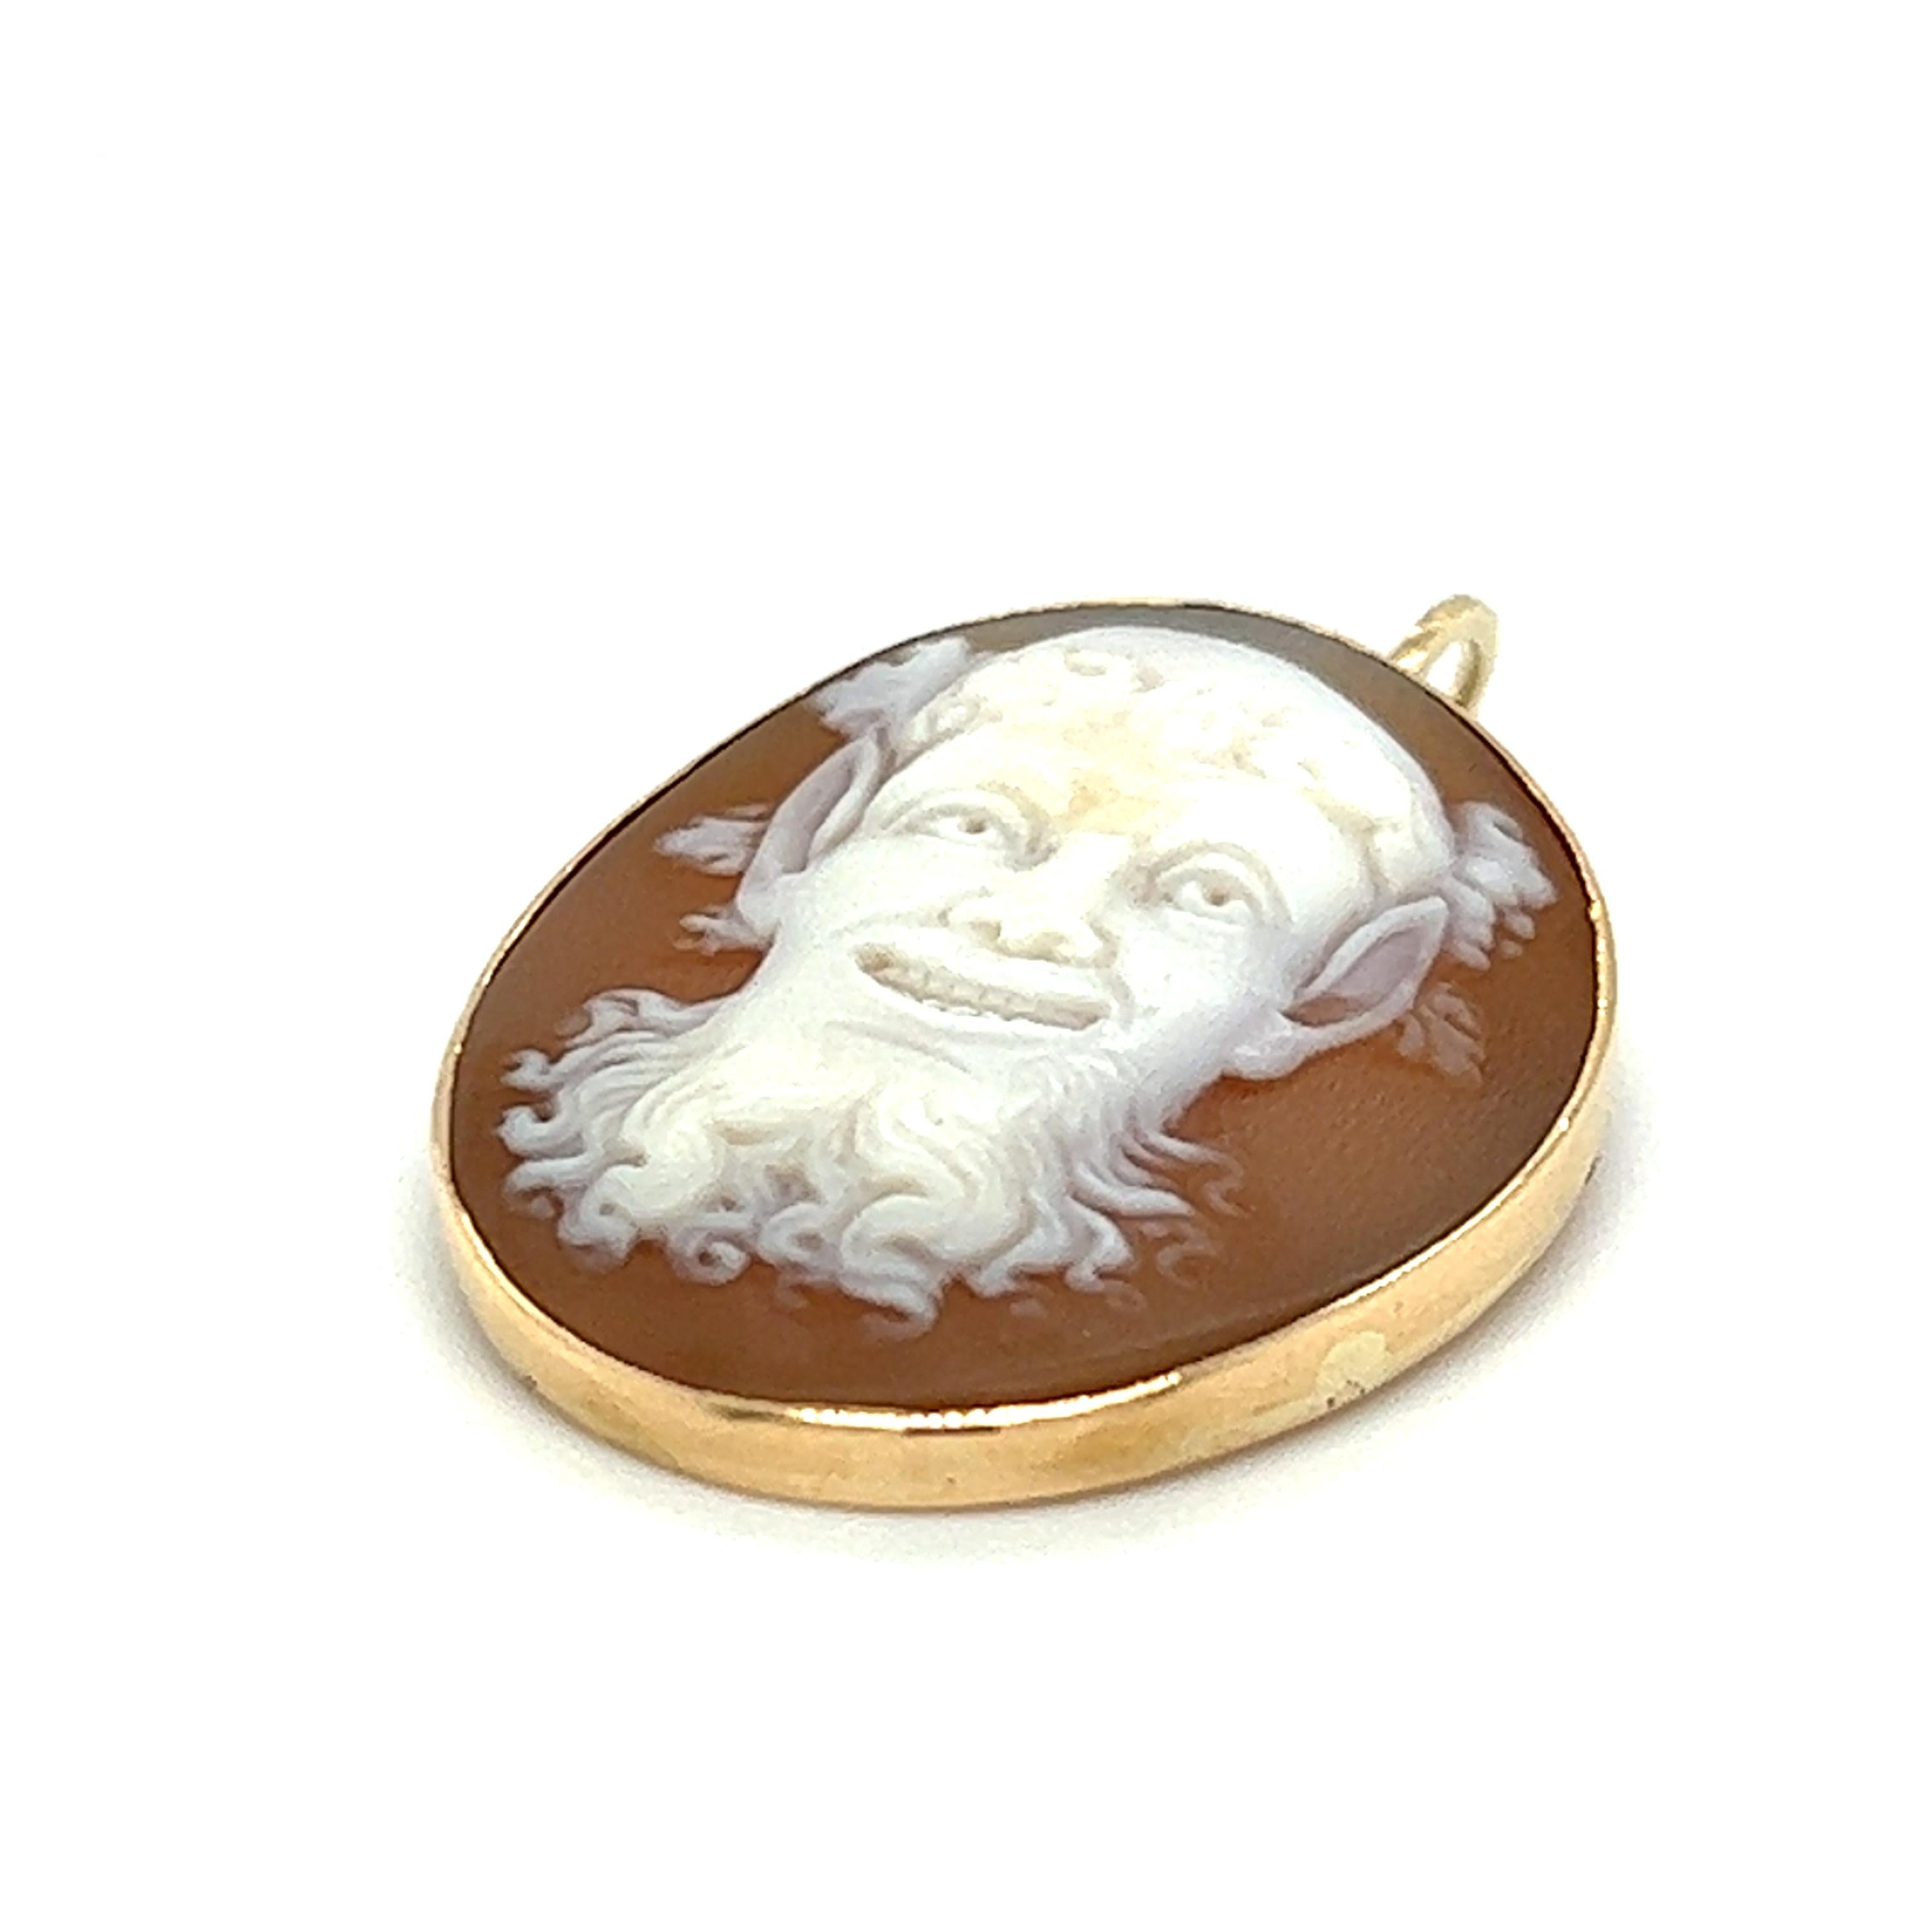 One 14-karat yellow gold shell cameo Bacchus design pendant.  The pendant measures 10.15mm long and 8.25mm wide.  